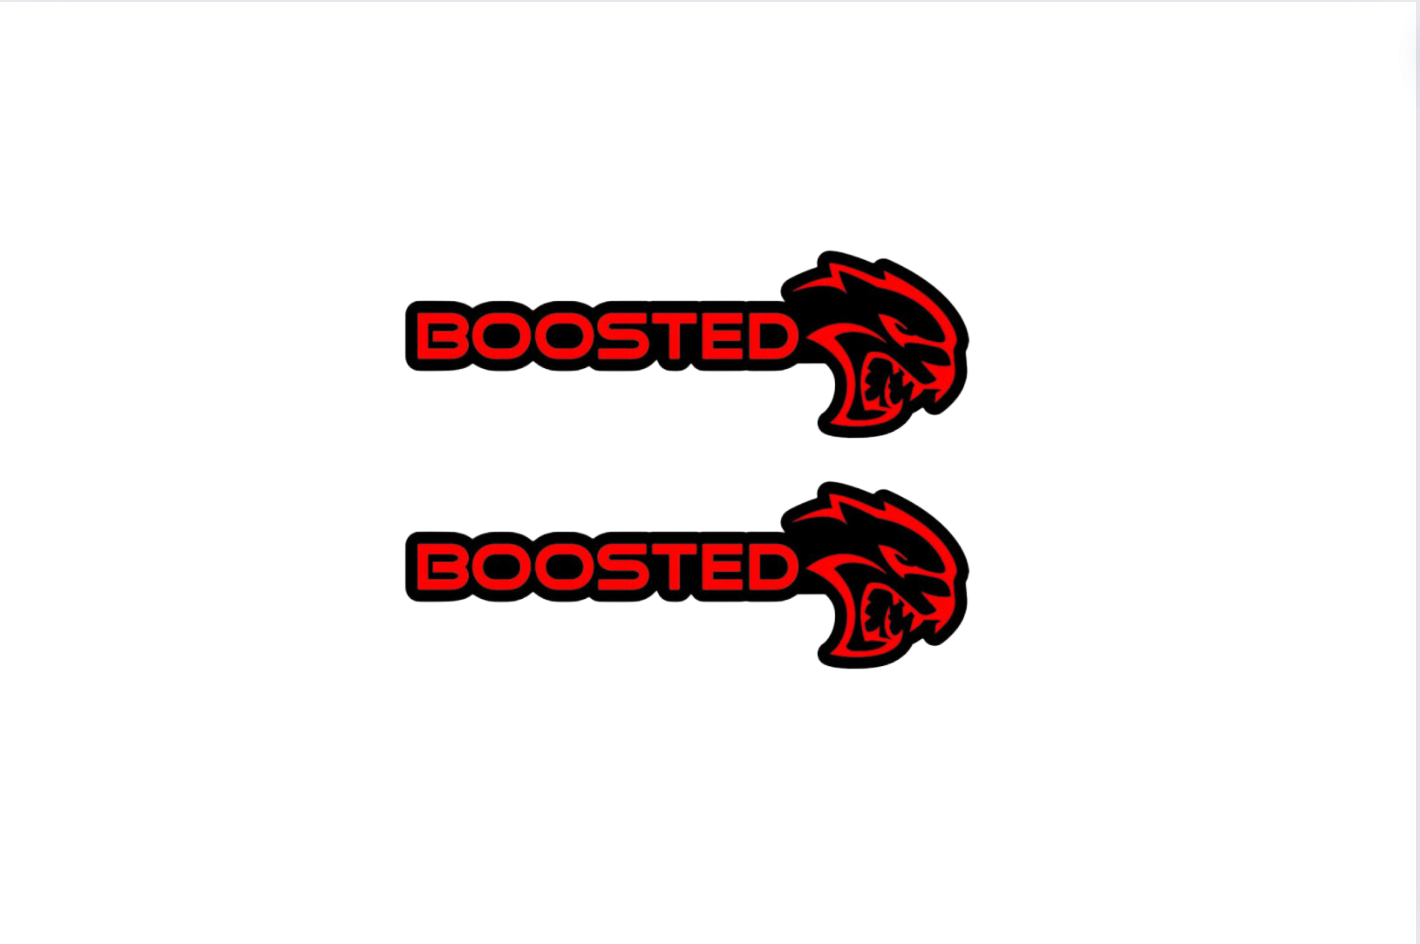 DODGE emblem for fenders with Boosted Hellcat logo